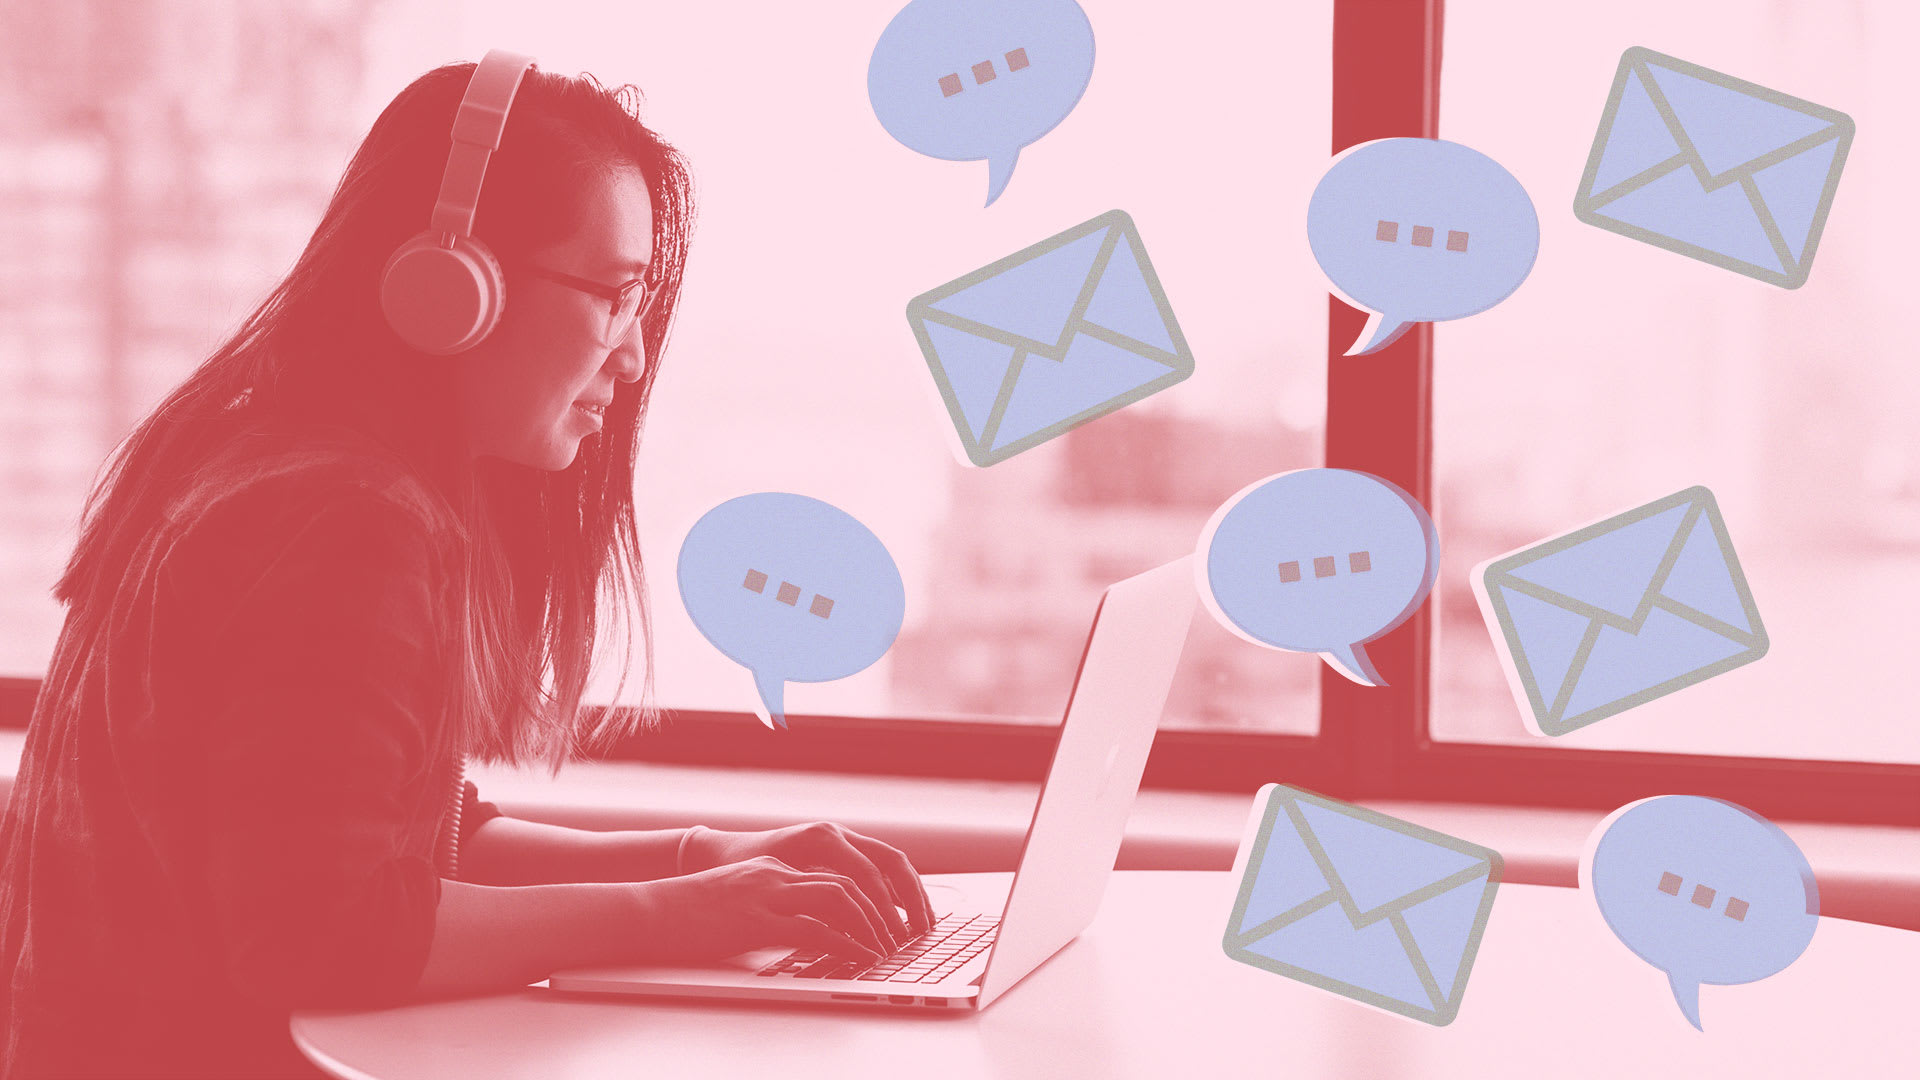 “Stay healthy!” 6 rules for email and work chat etiquette in the age of COVID-19